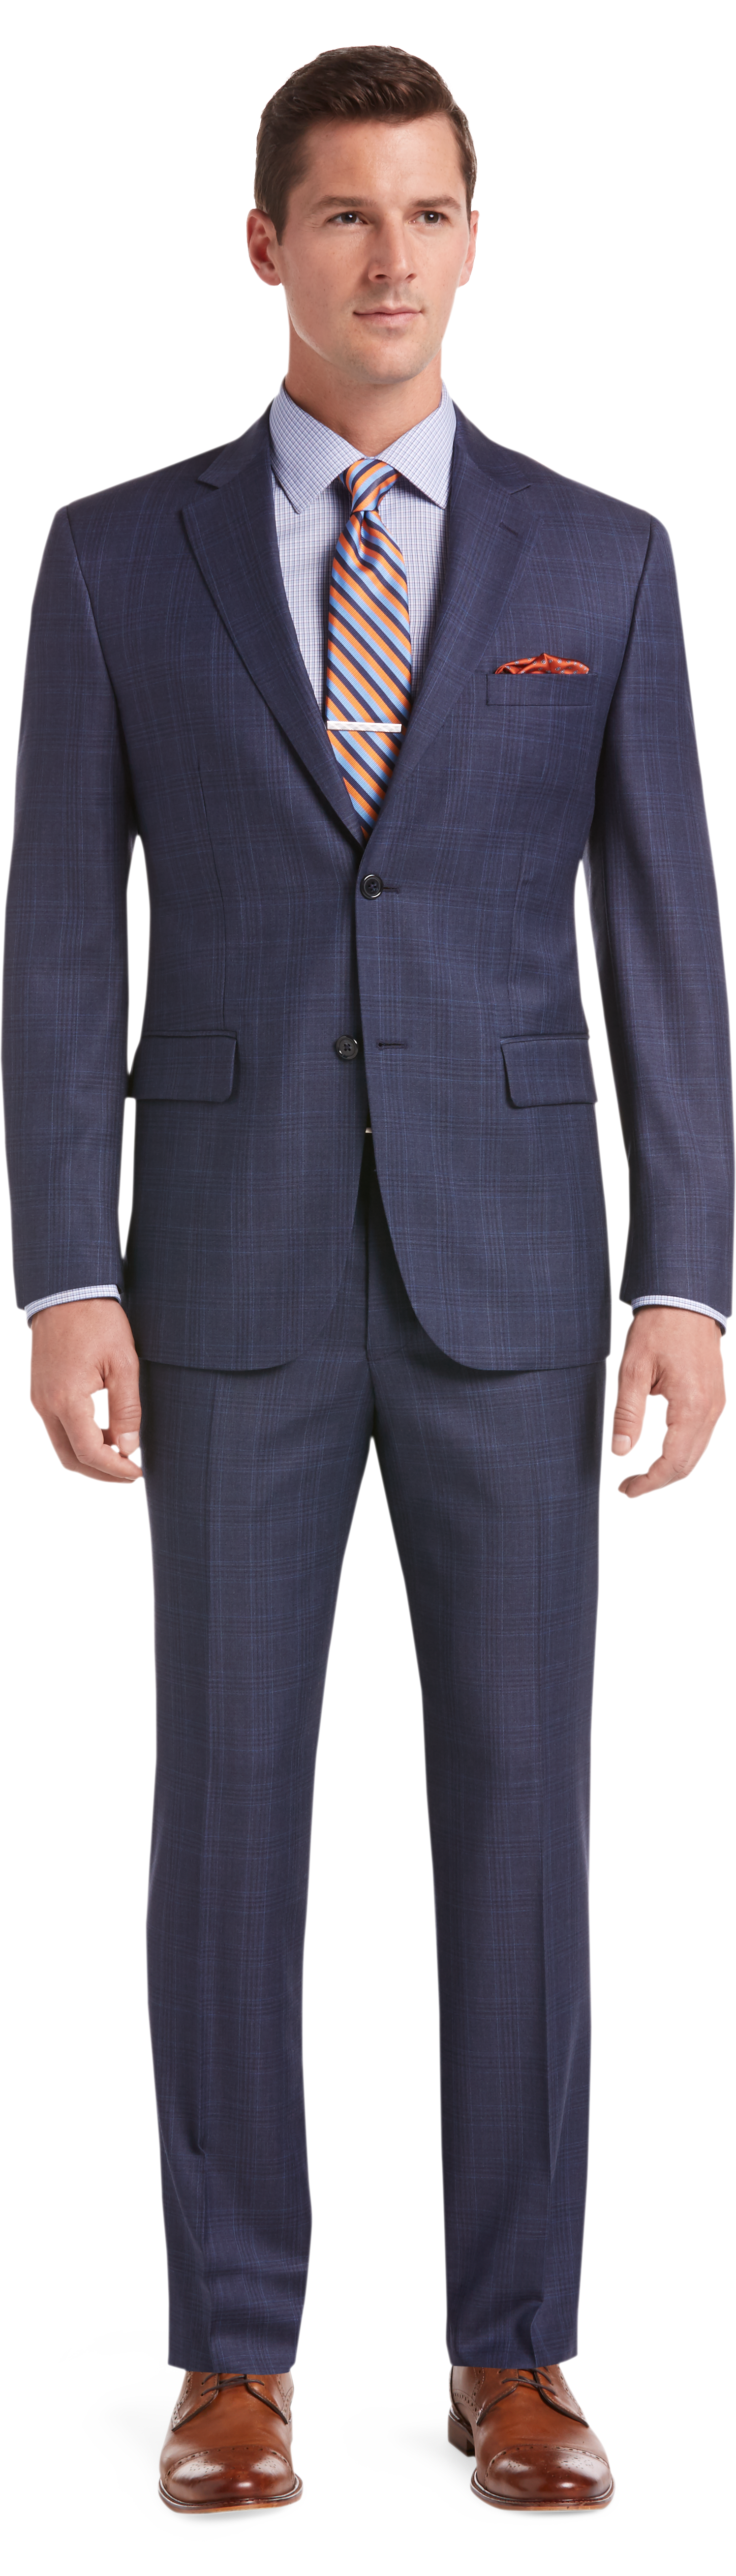 Signature Collection Traditional Fit Suit - Big & Tall CLEARANCE - All